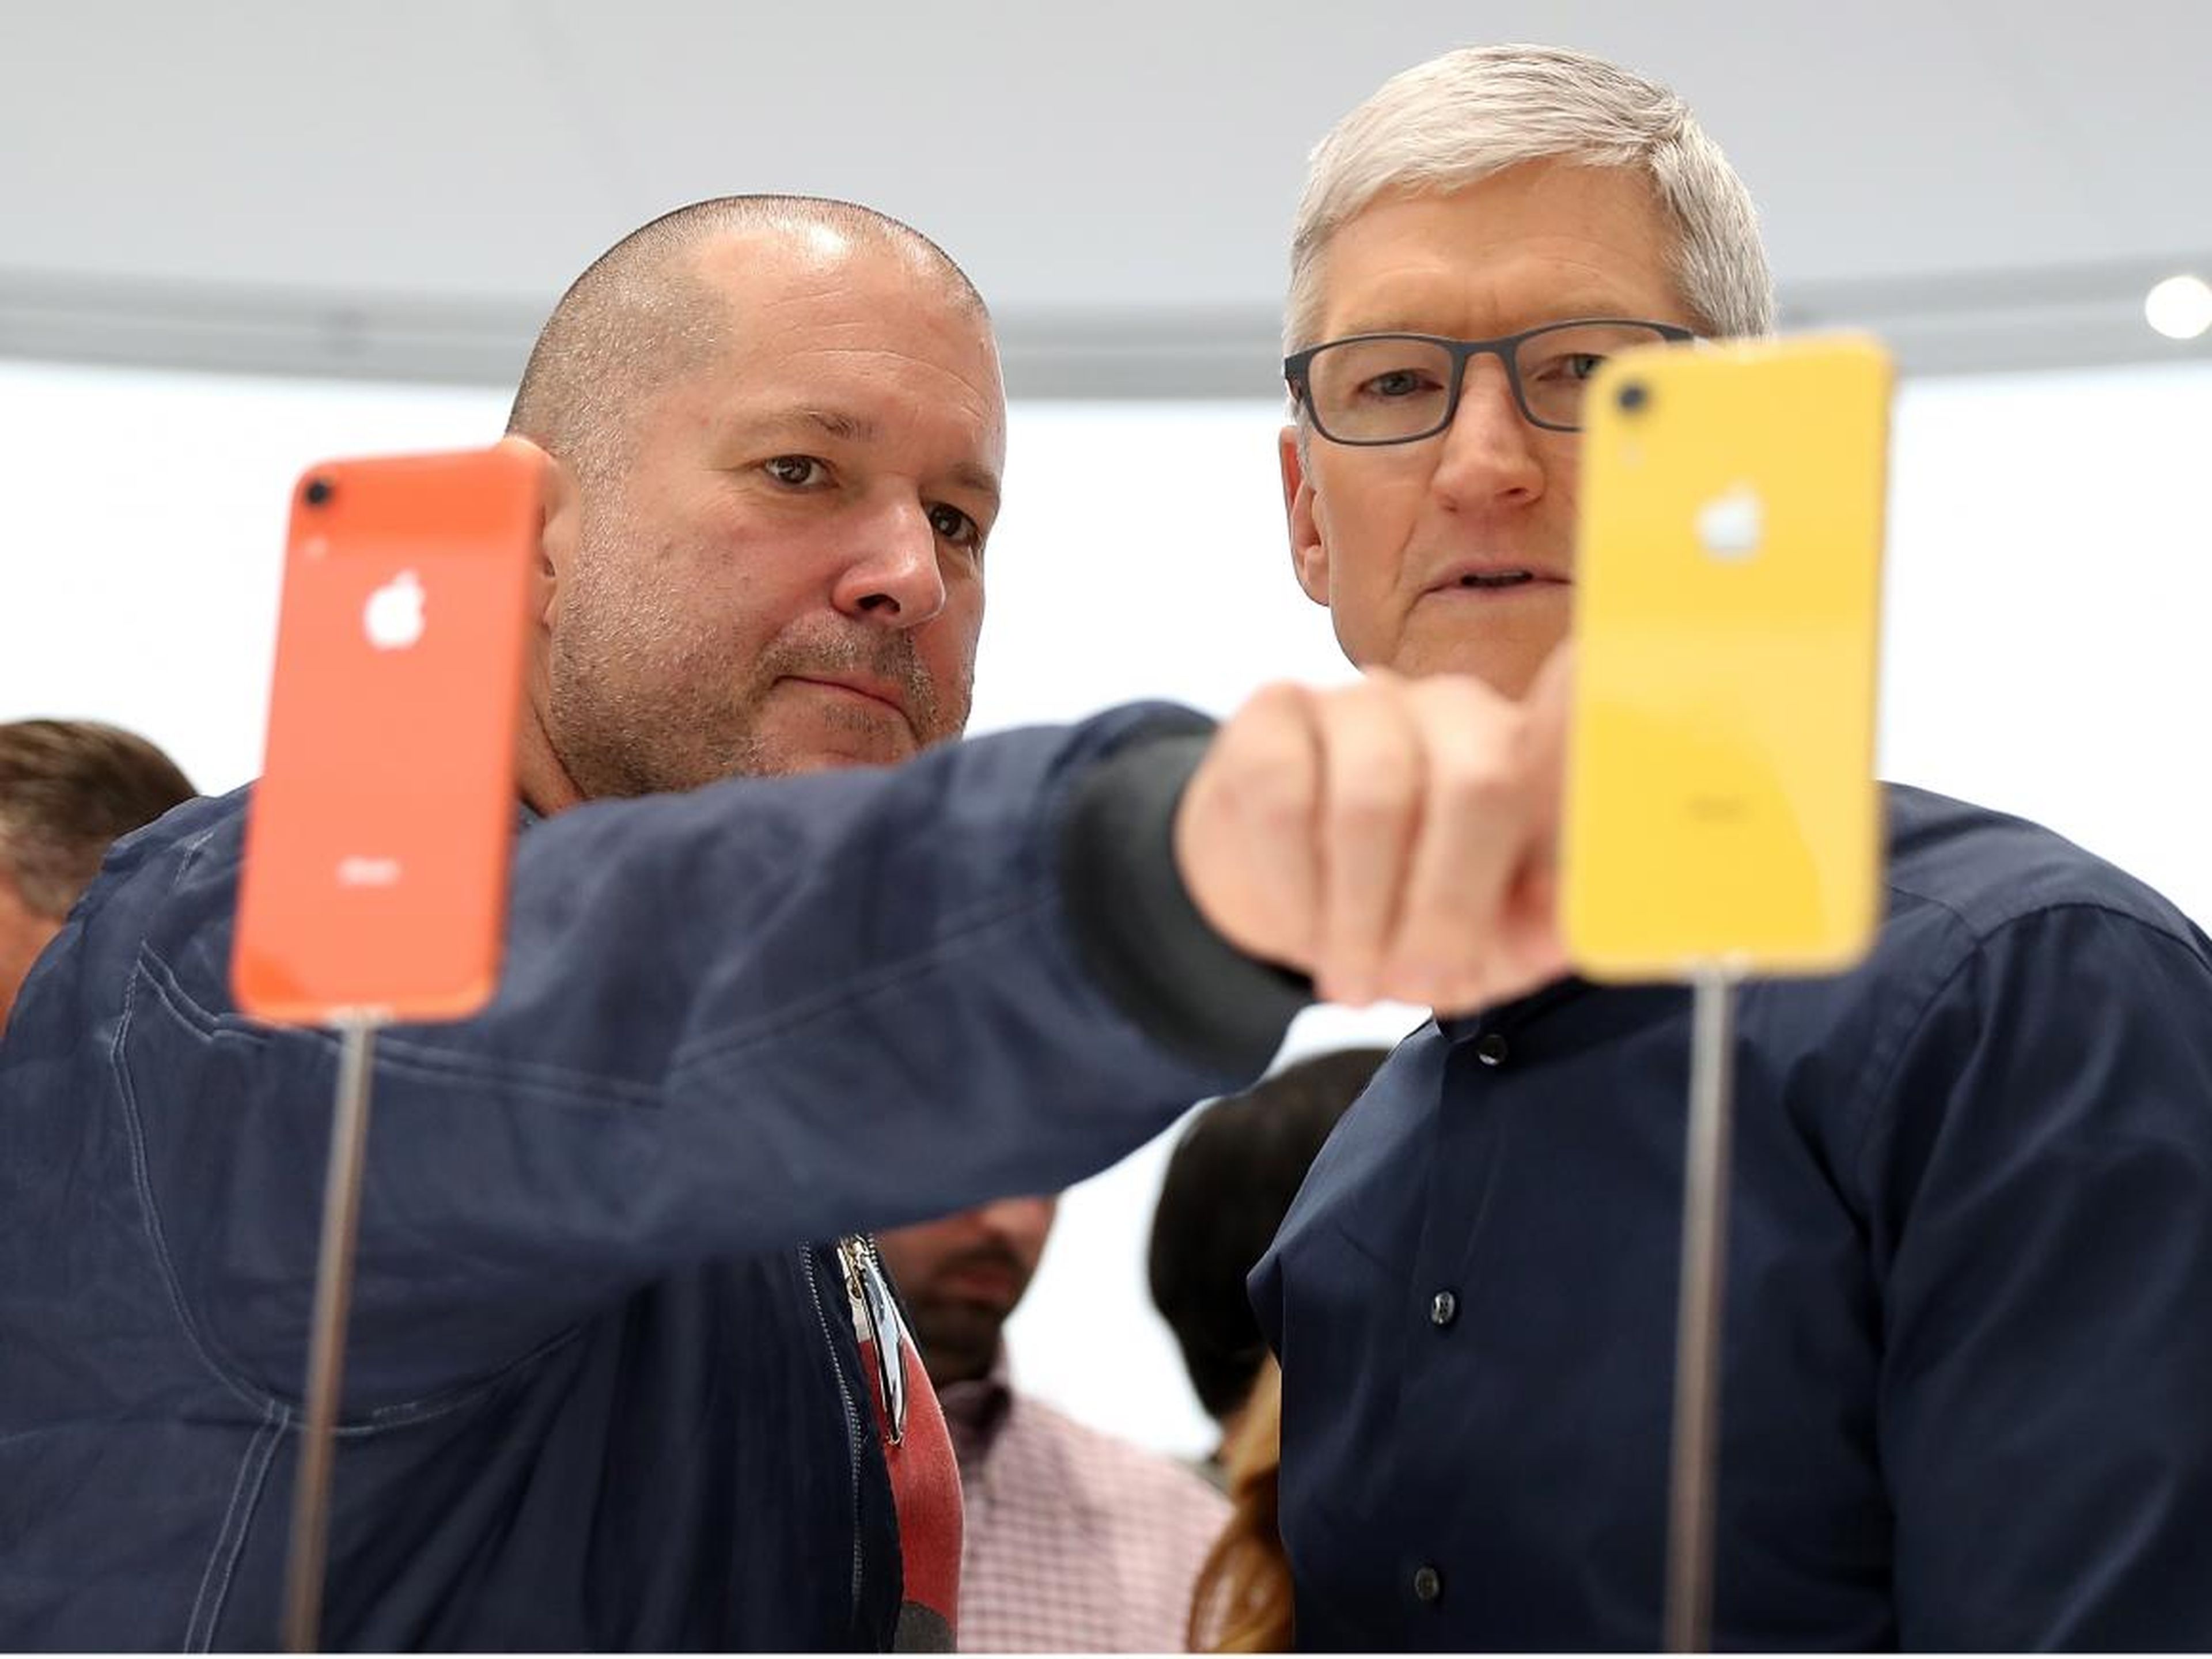 Jony Ive is leaving Apple — here are his most iconic creations, which helped lead Apple from almost certain doom to total dominance